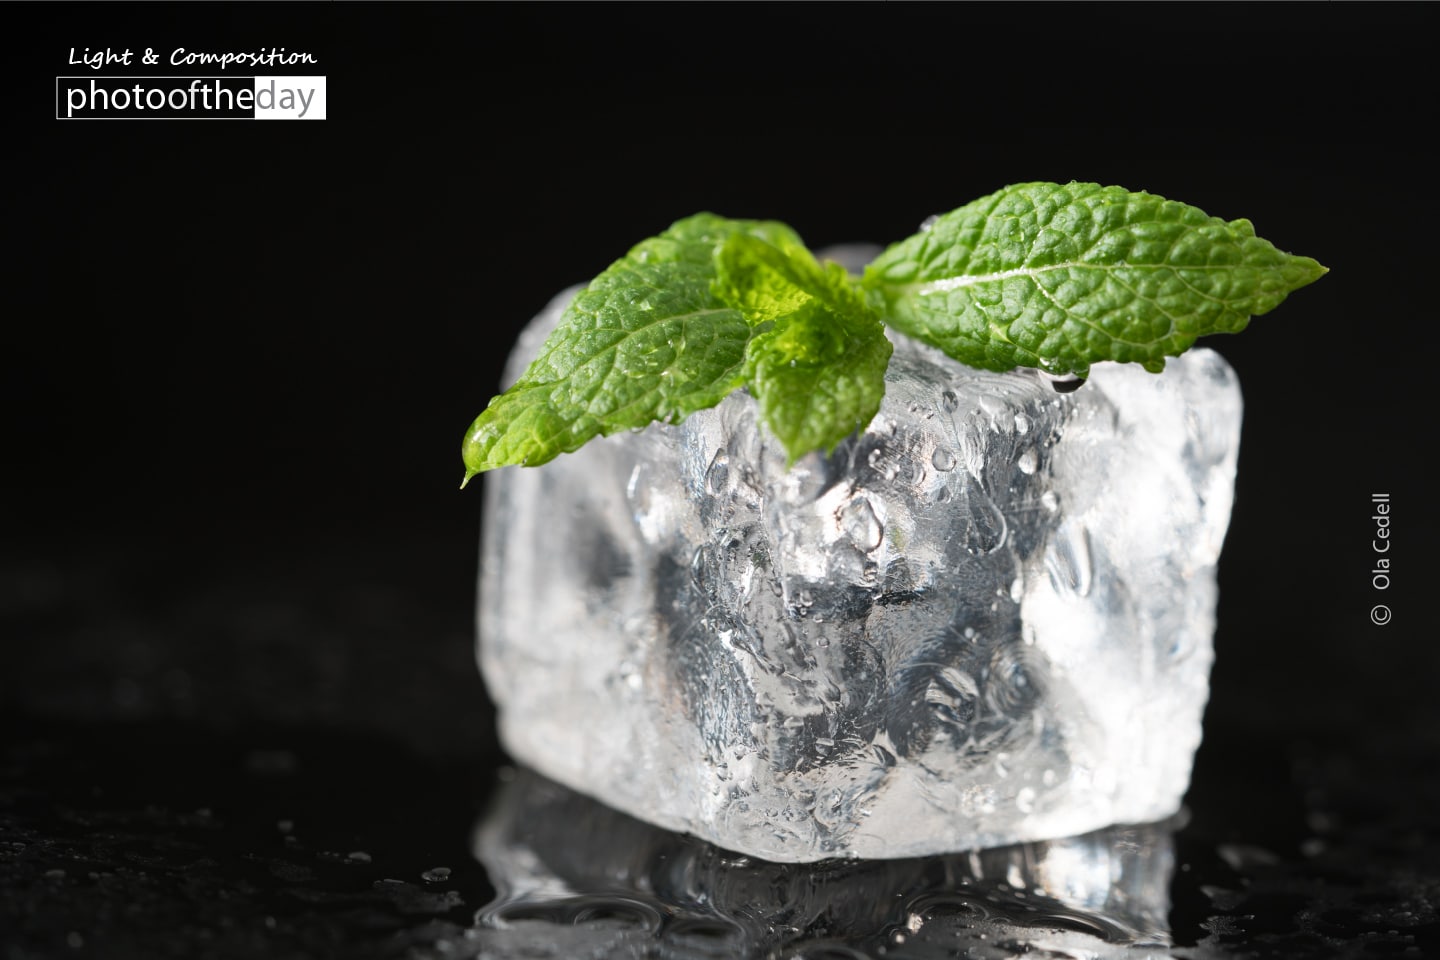 Mint on Ice, by Ola Cedell